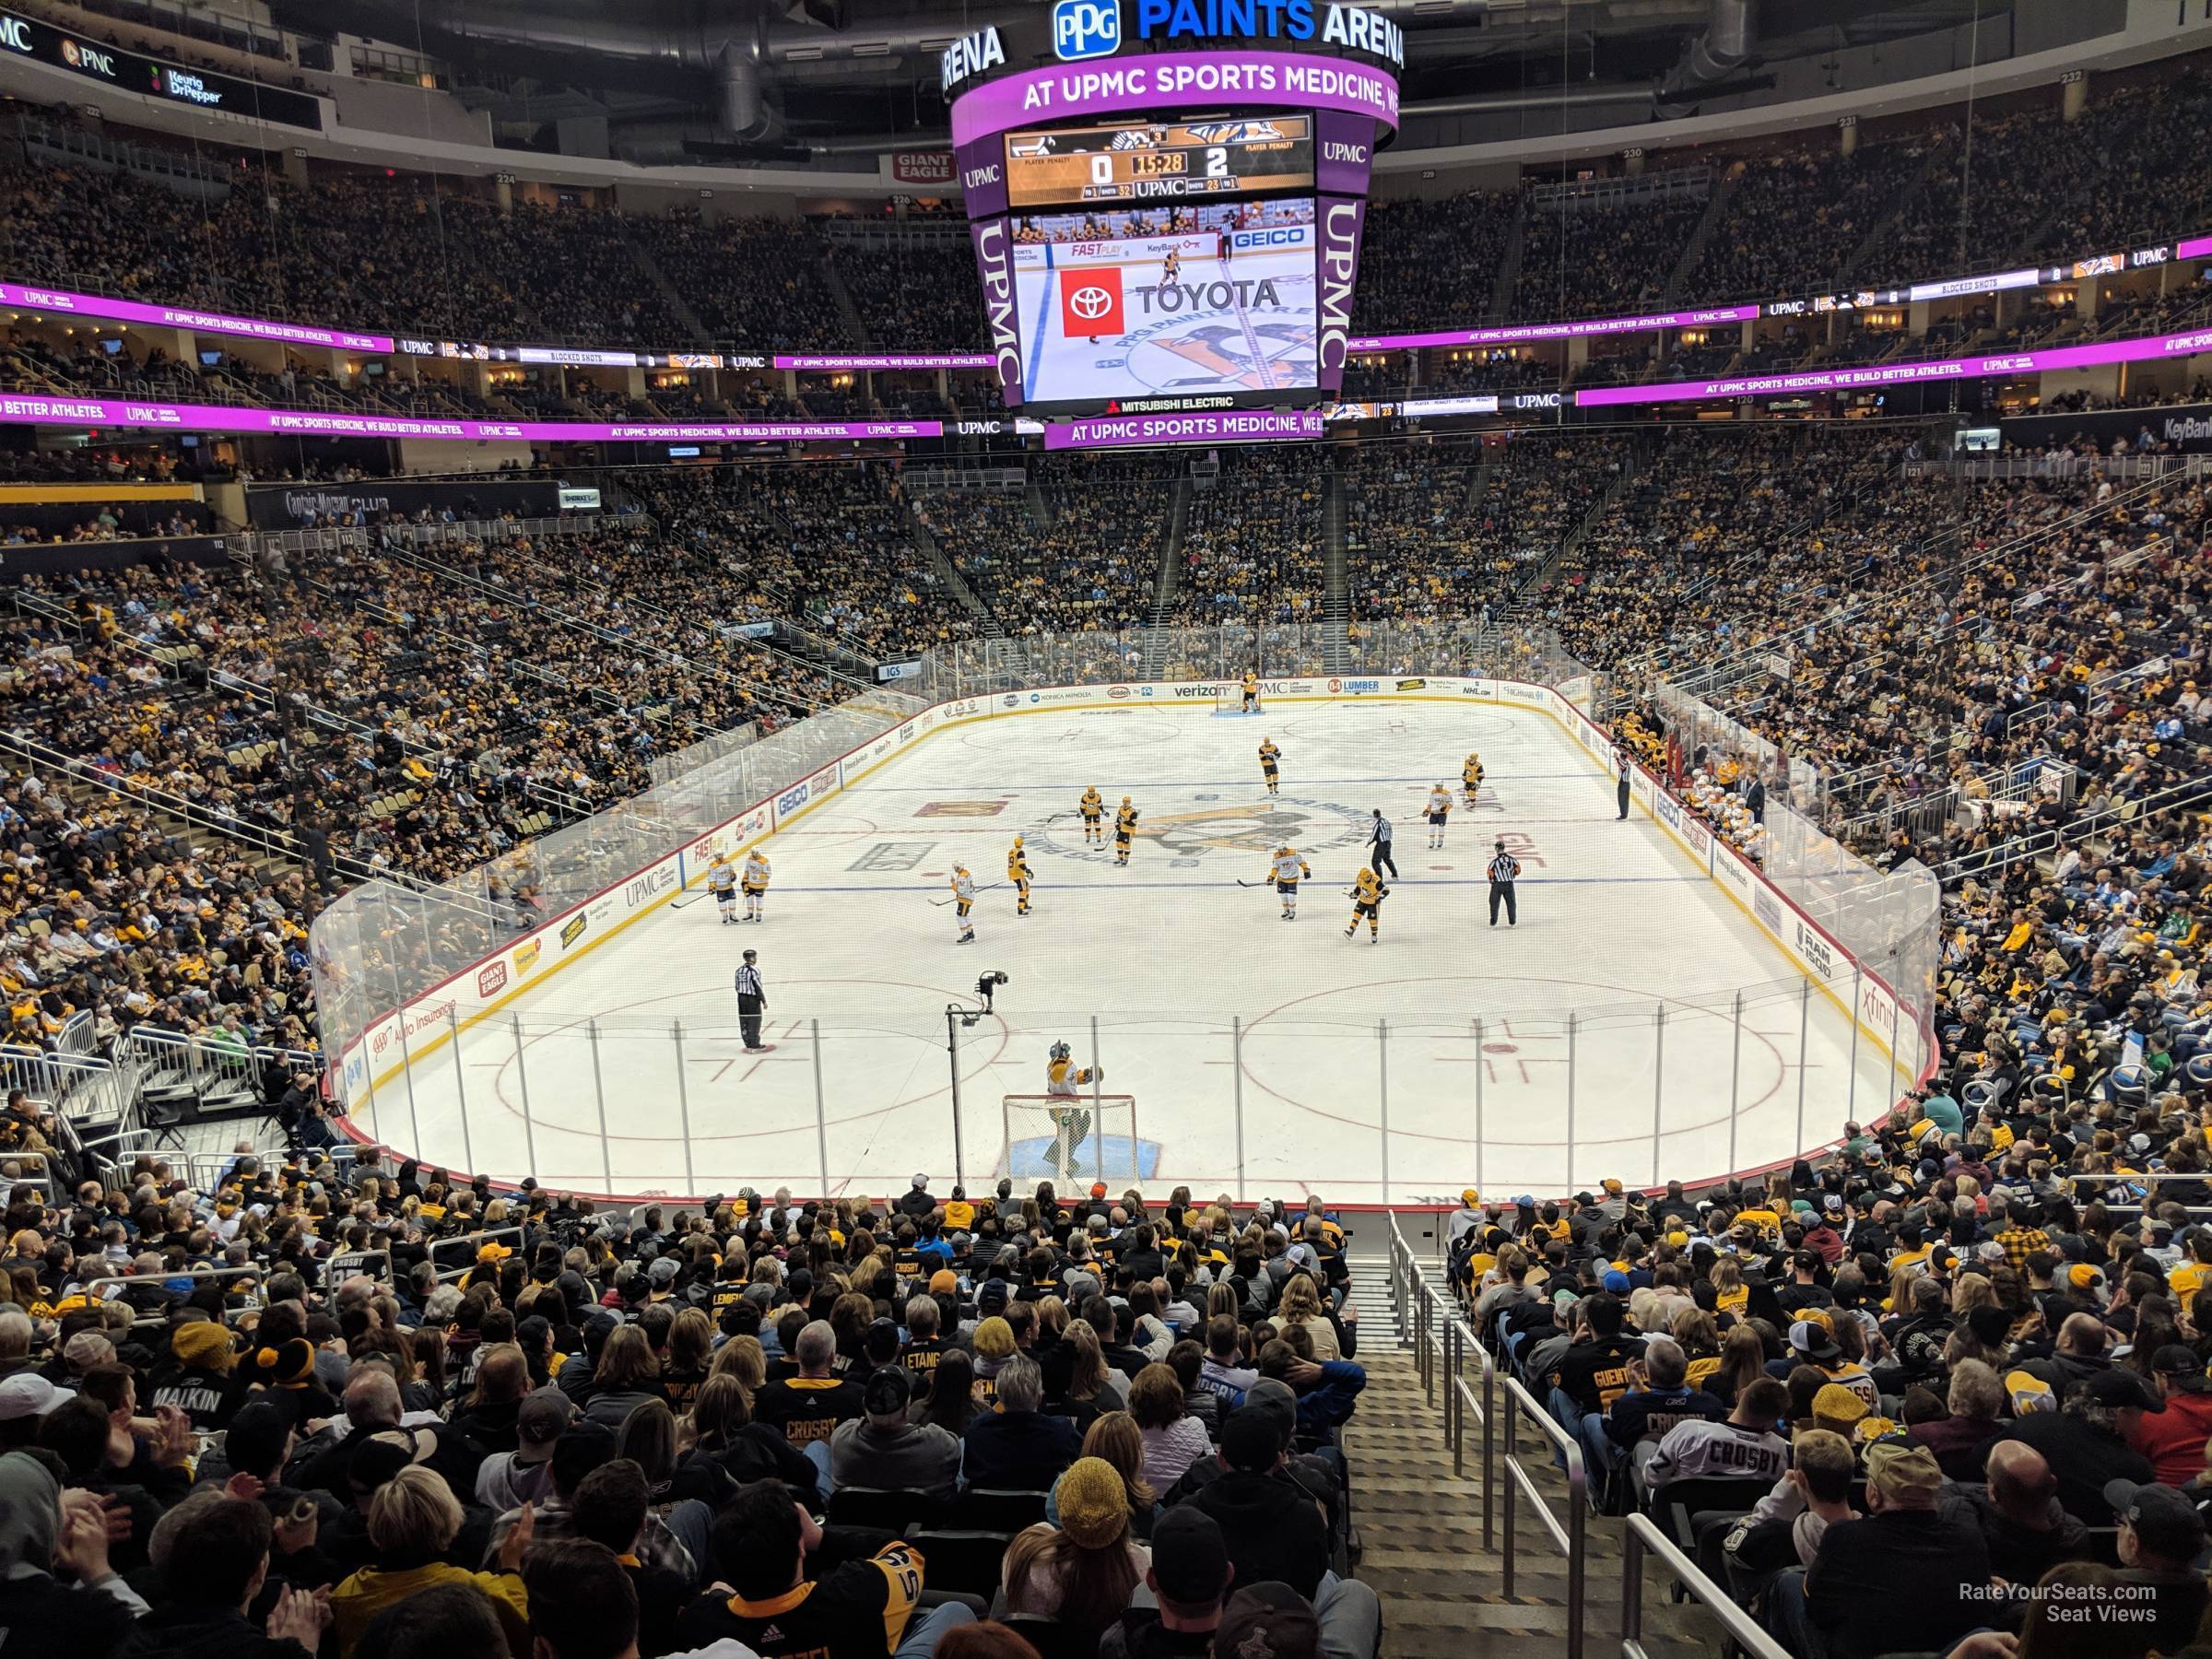 section 107, row z seat view  for hockey - ppg paints arena